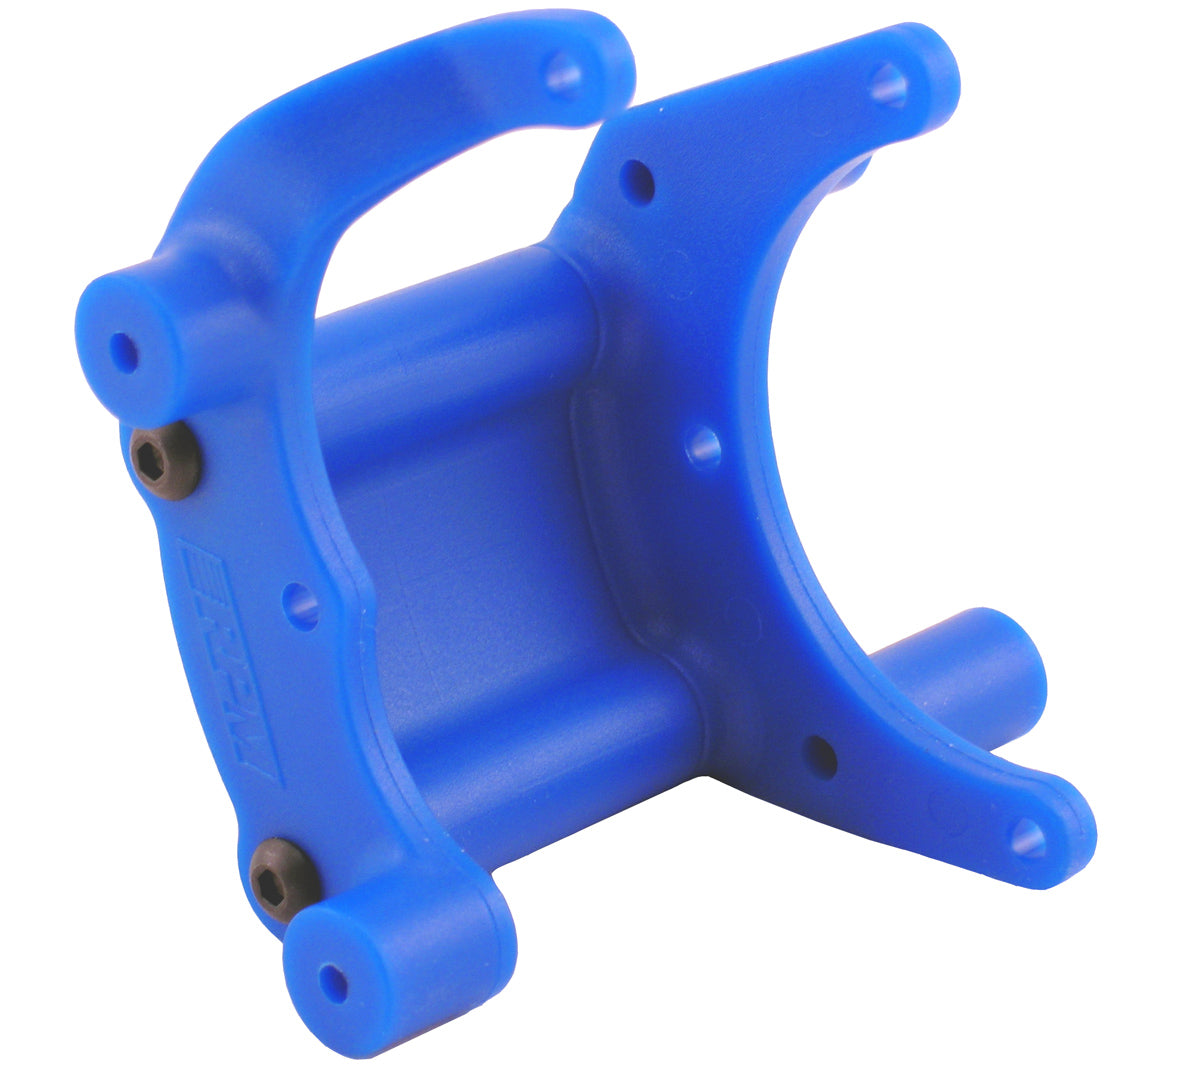 RPM RC Products: Mount for Rear Bumper or Wheelie Bar for the Traxxxas Slash 2wd, e-Rustler, e-Stampede 2wd & Bandit